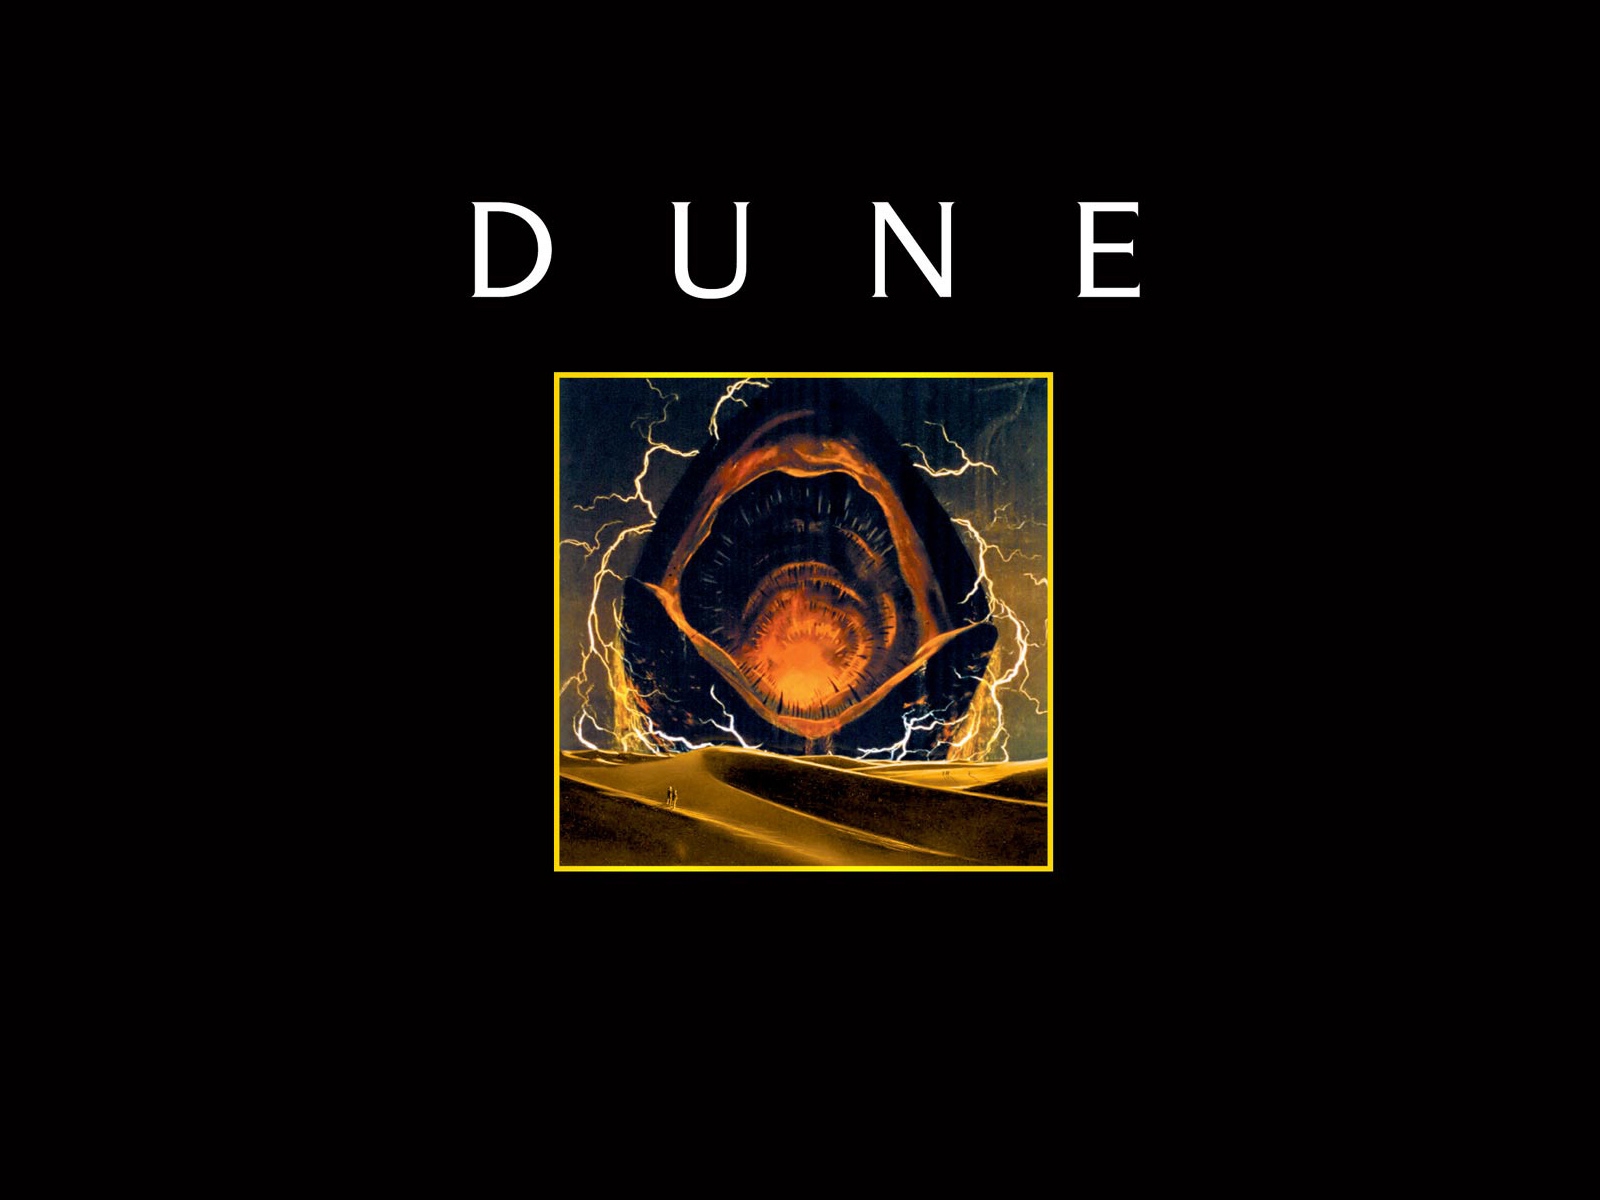 Dune 1984 Wallpaper And Background Image 1600x1200